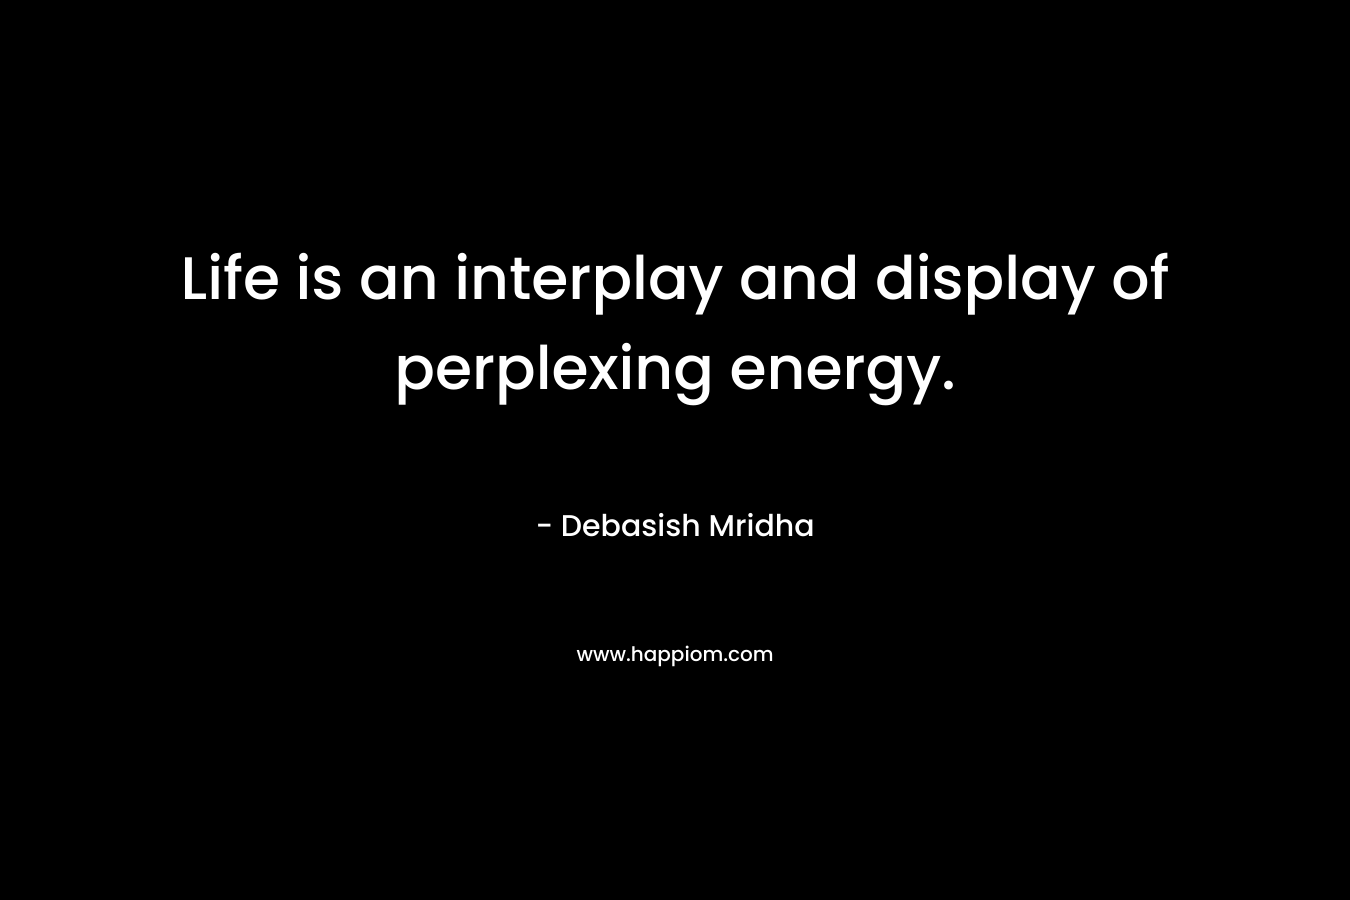 Life is an interplay and display of perplexing energy.